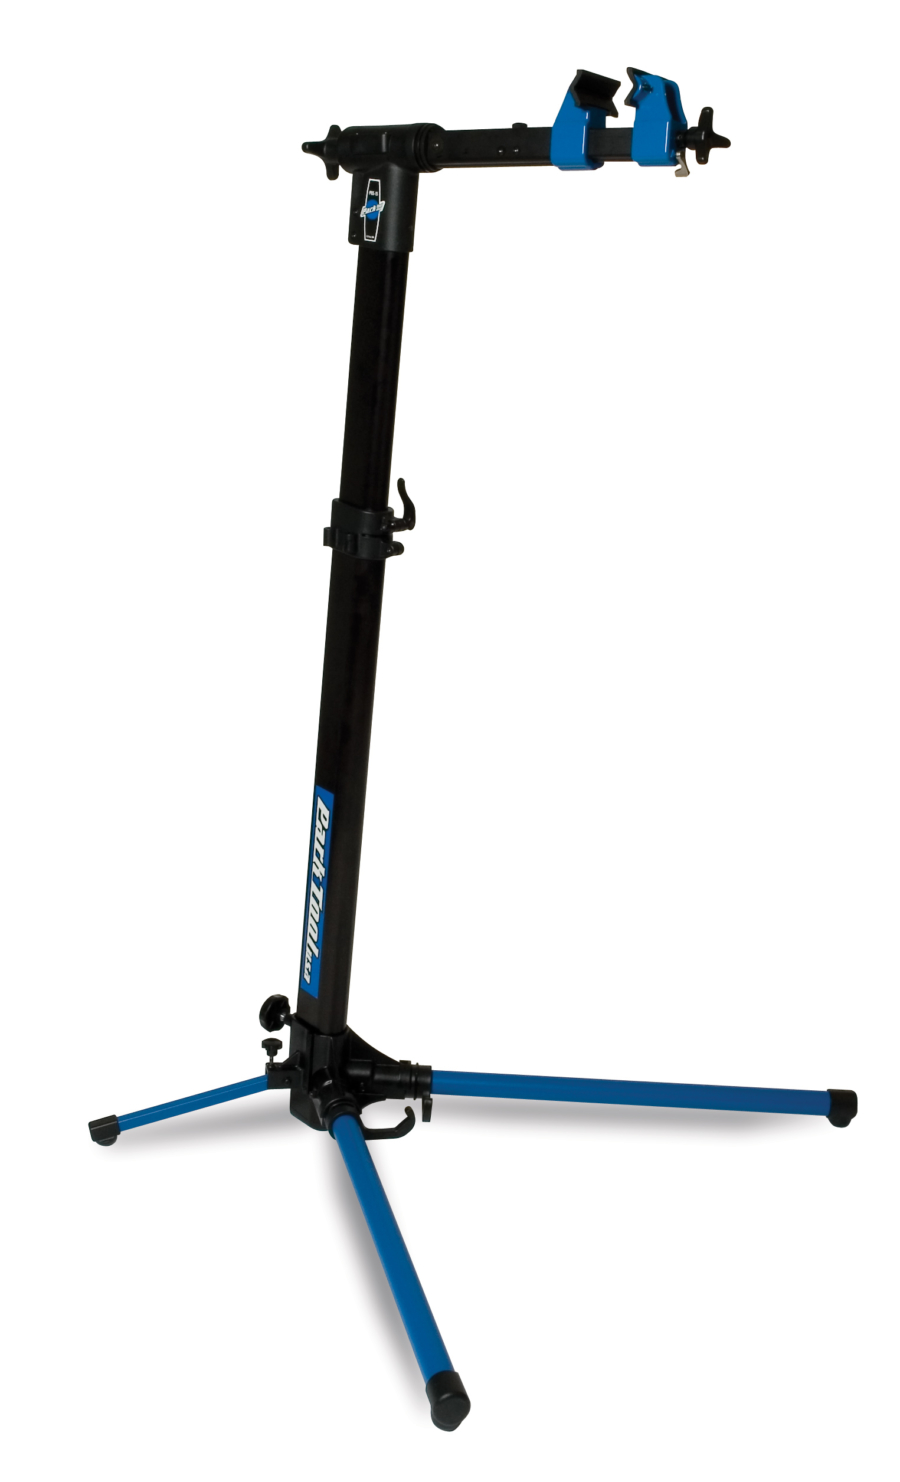 The Park Tool PRS-15 Professional Race Stand, enlarged